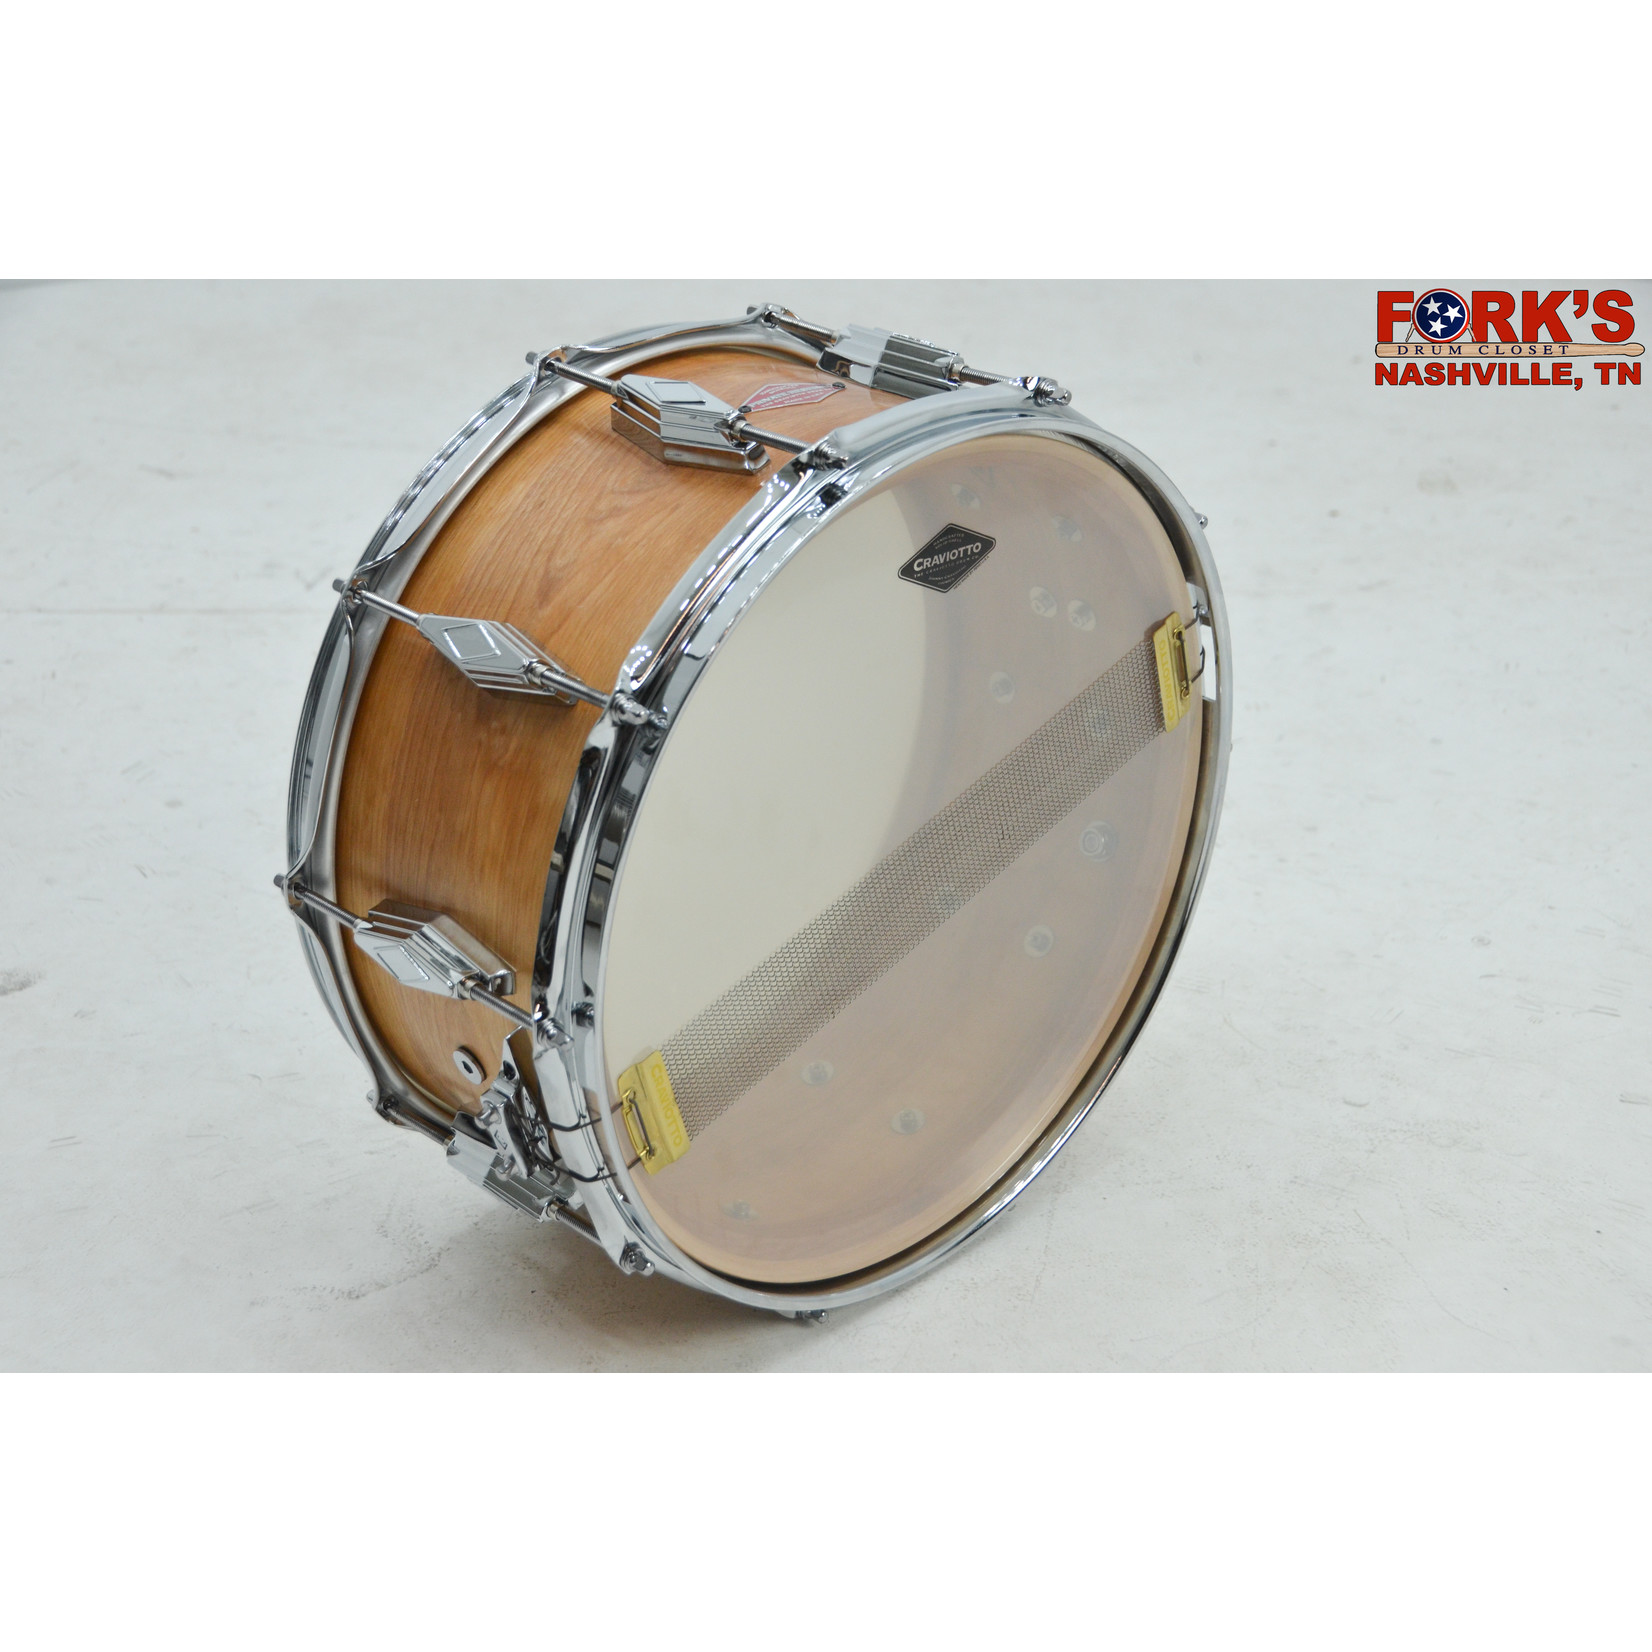 Craviotto Craviotto Private Reserve SJRS model 6.5x14 Snare Drum - 'Timeless Birch' (#4 of 10)